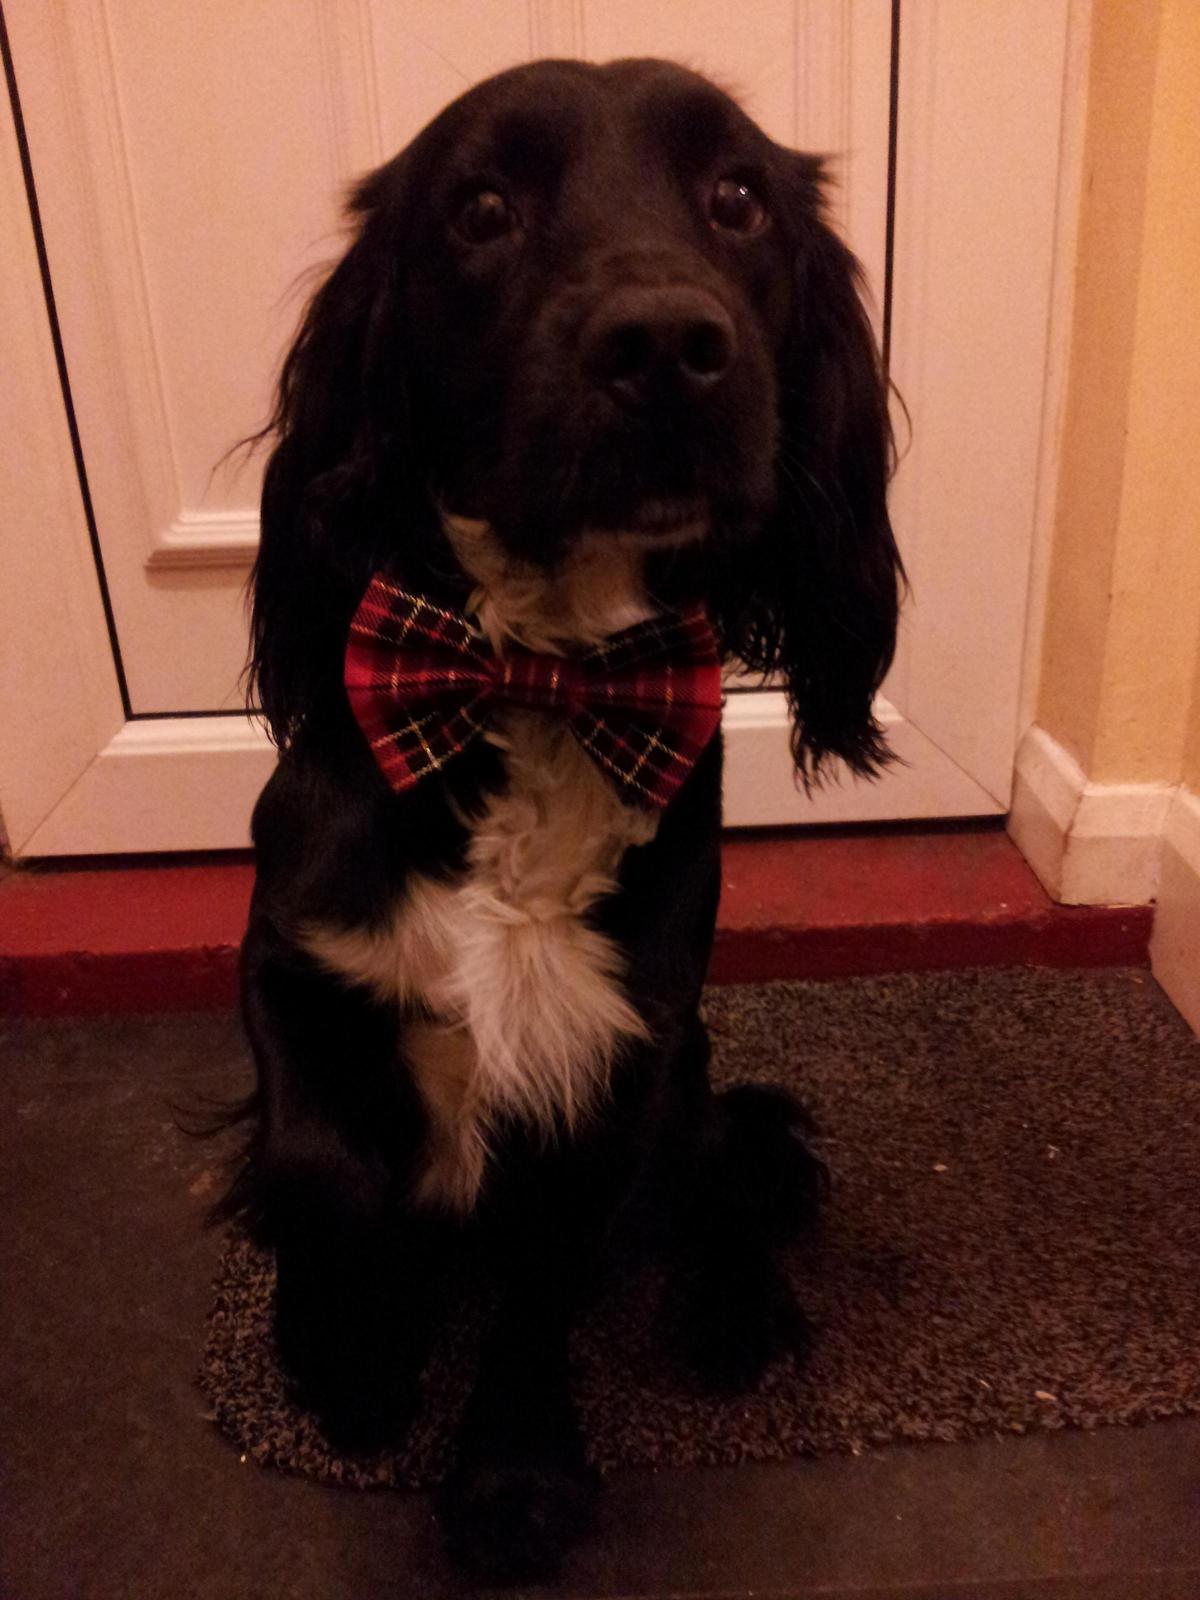 Jo Andrews from Darlington sent in this photo of her dog, Lenny